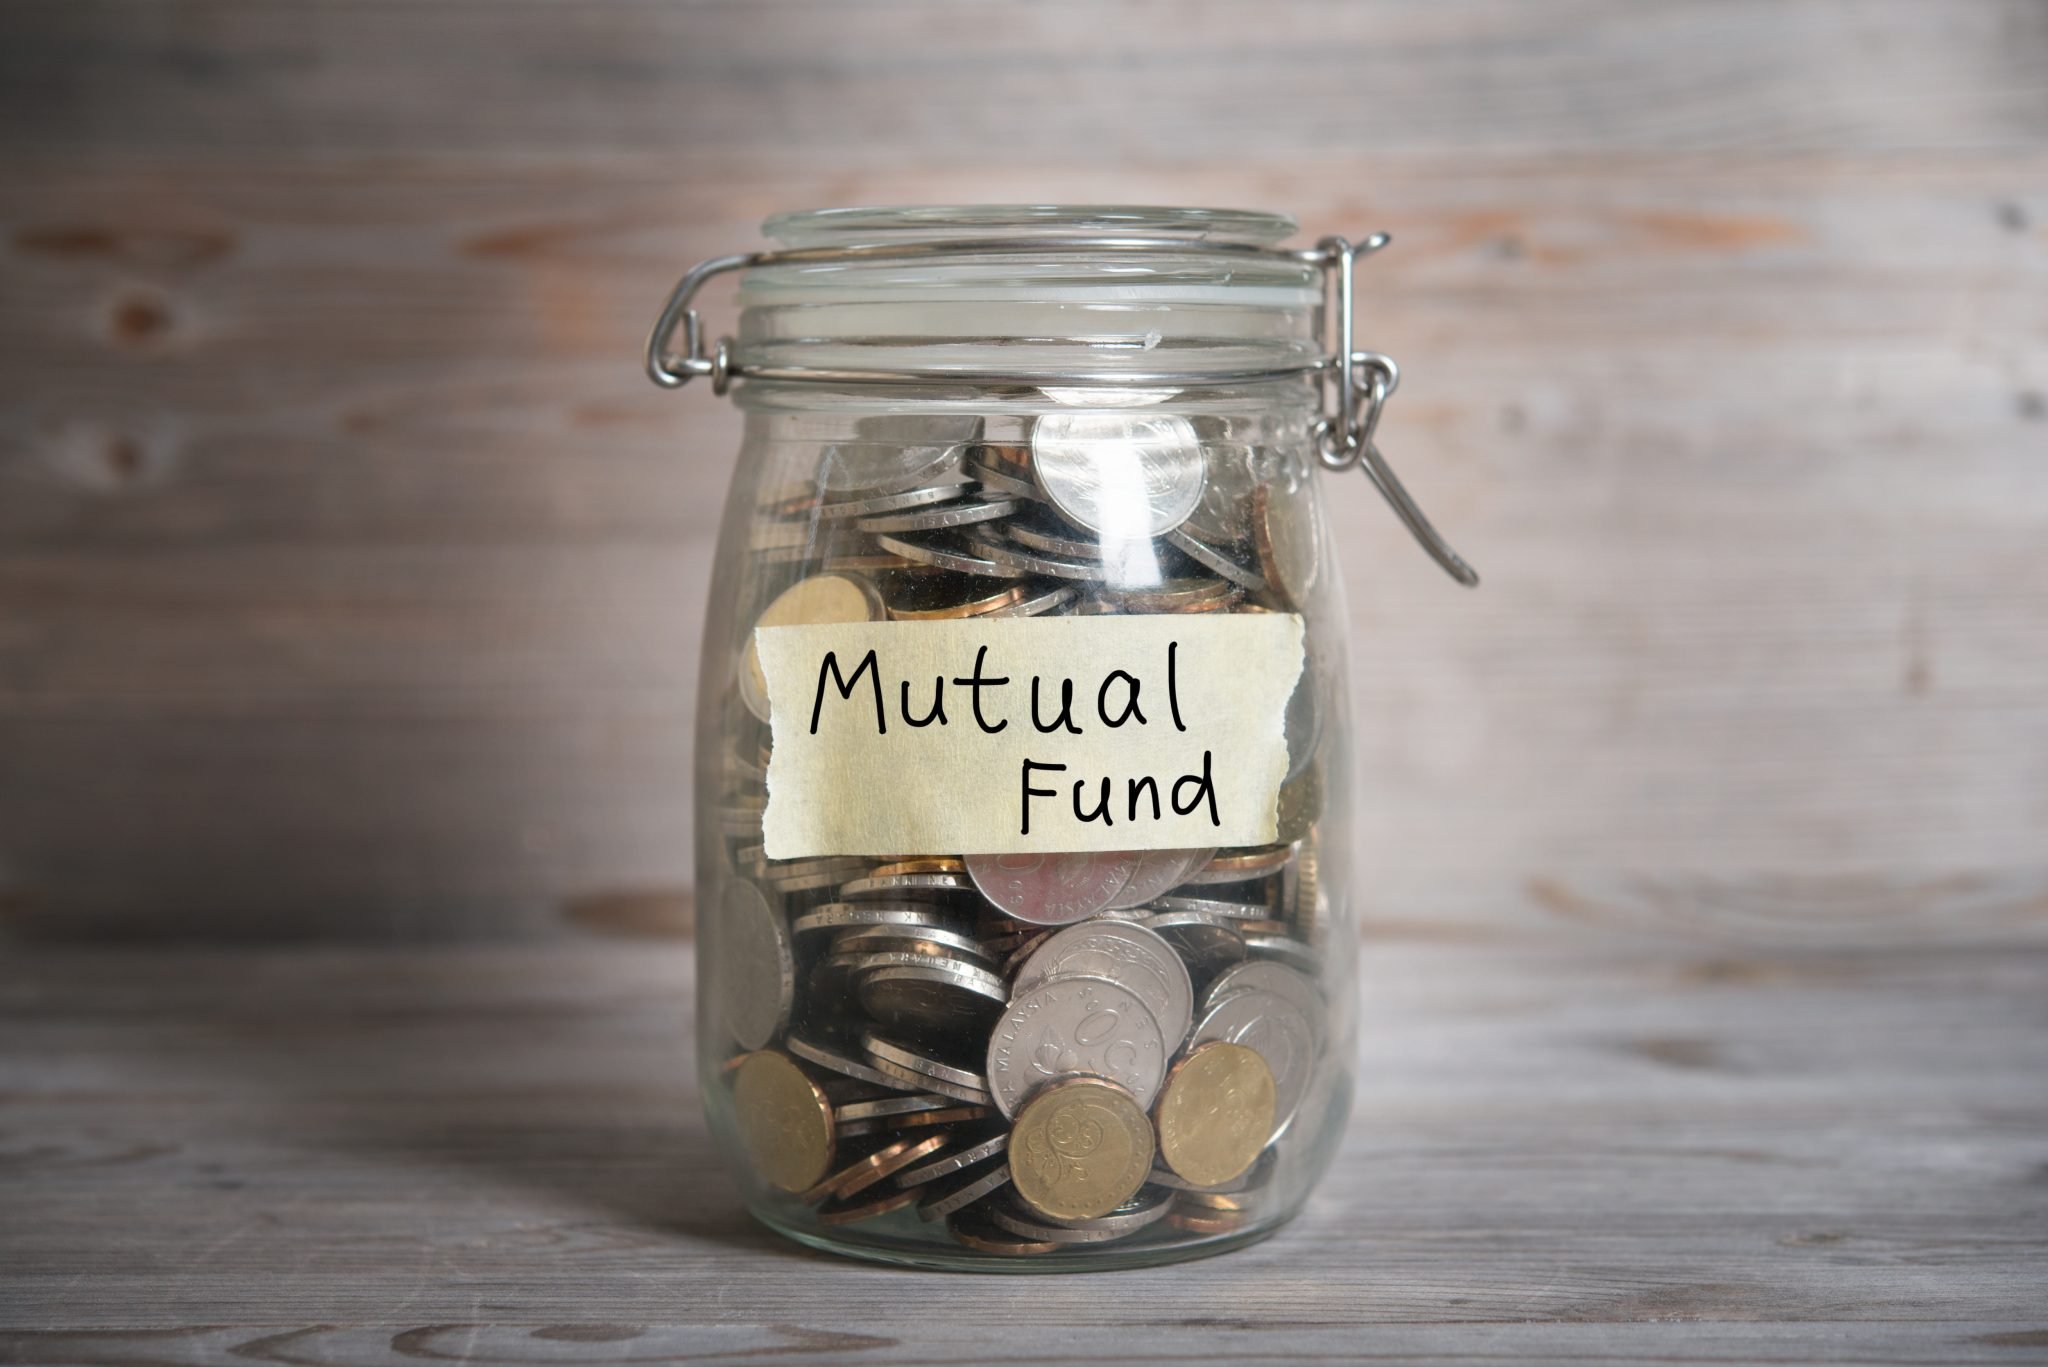 gross expense ratio of mutual fund